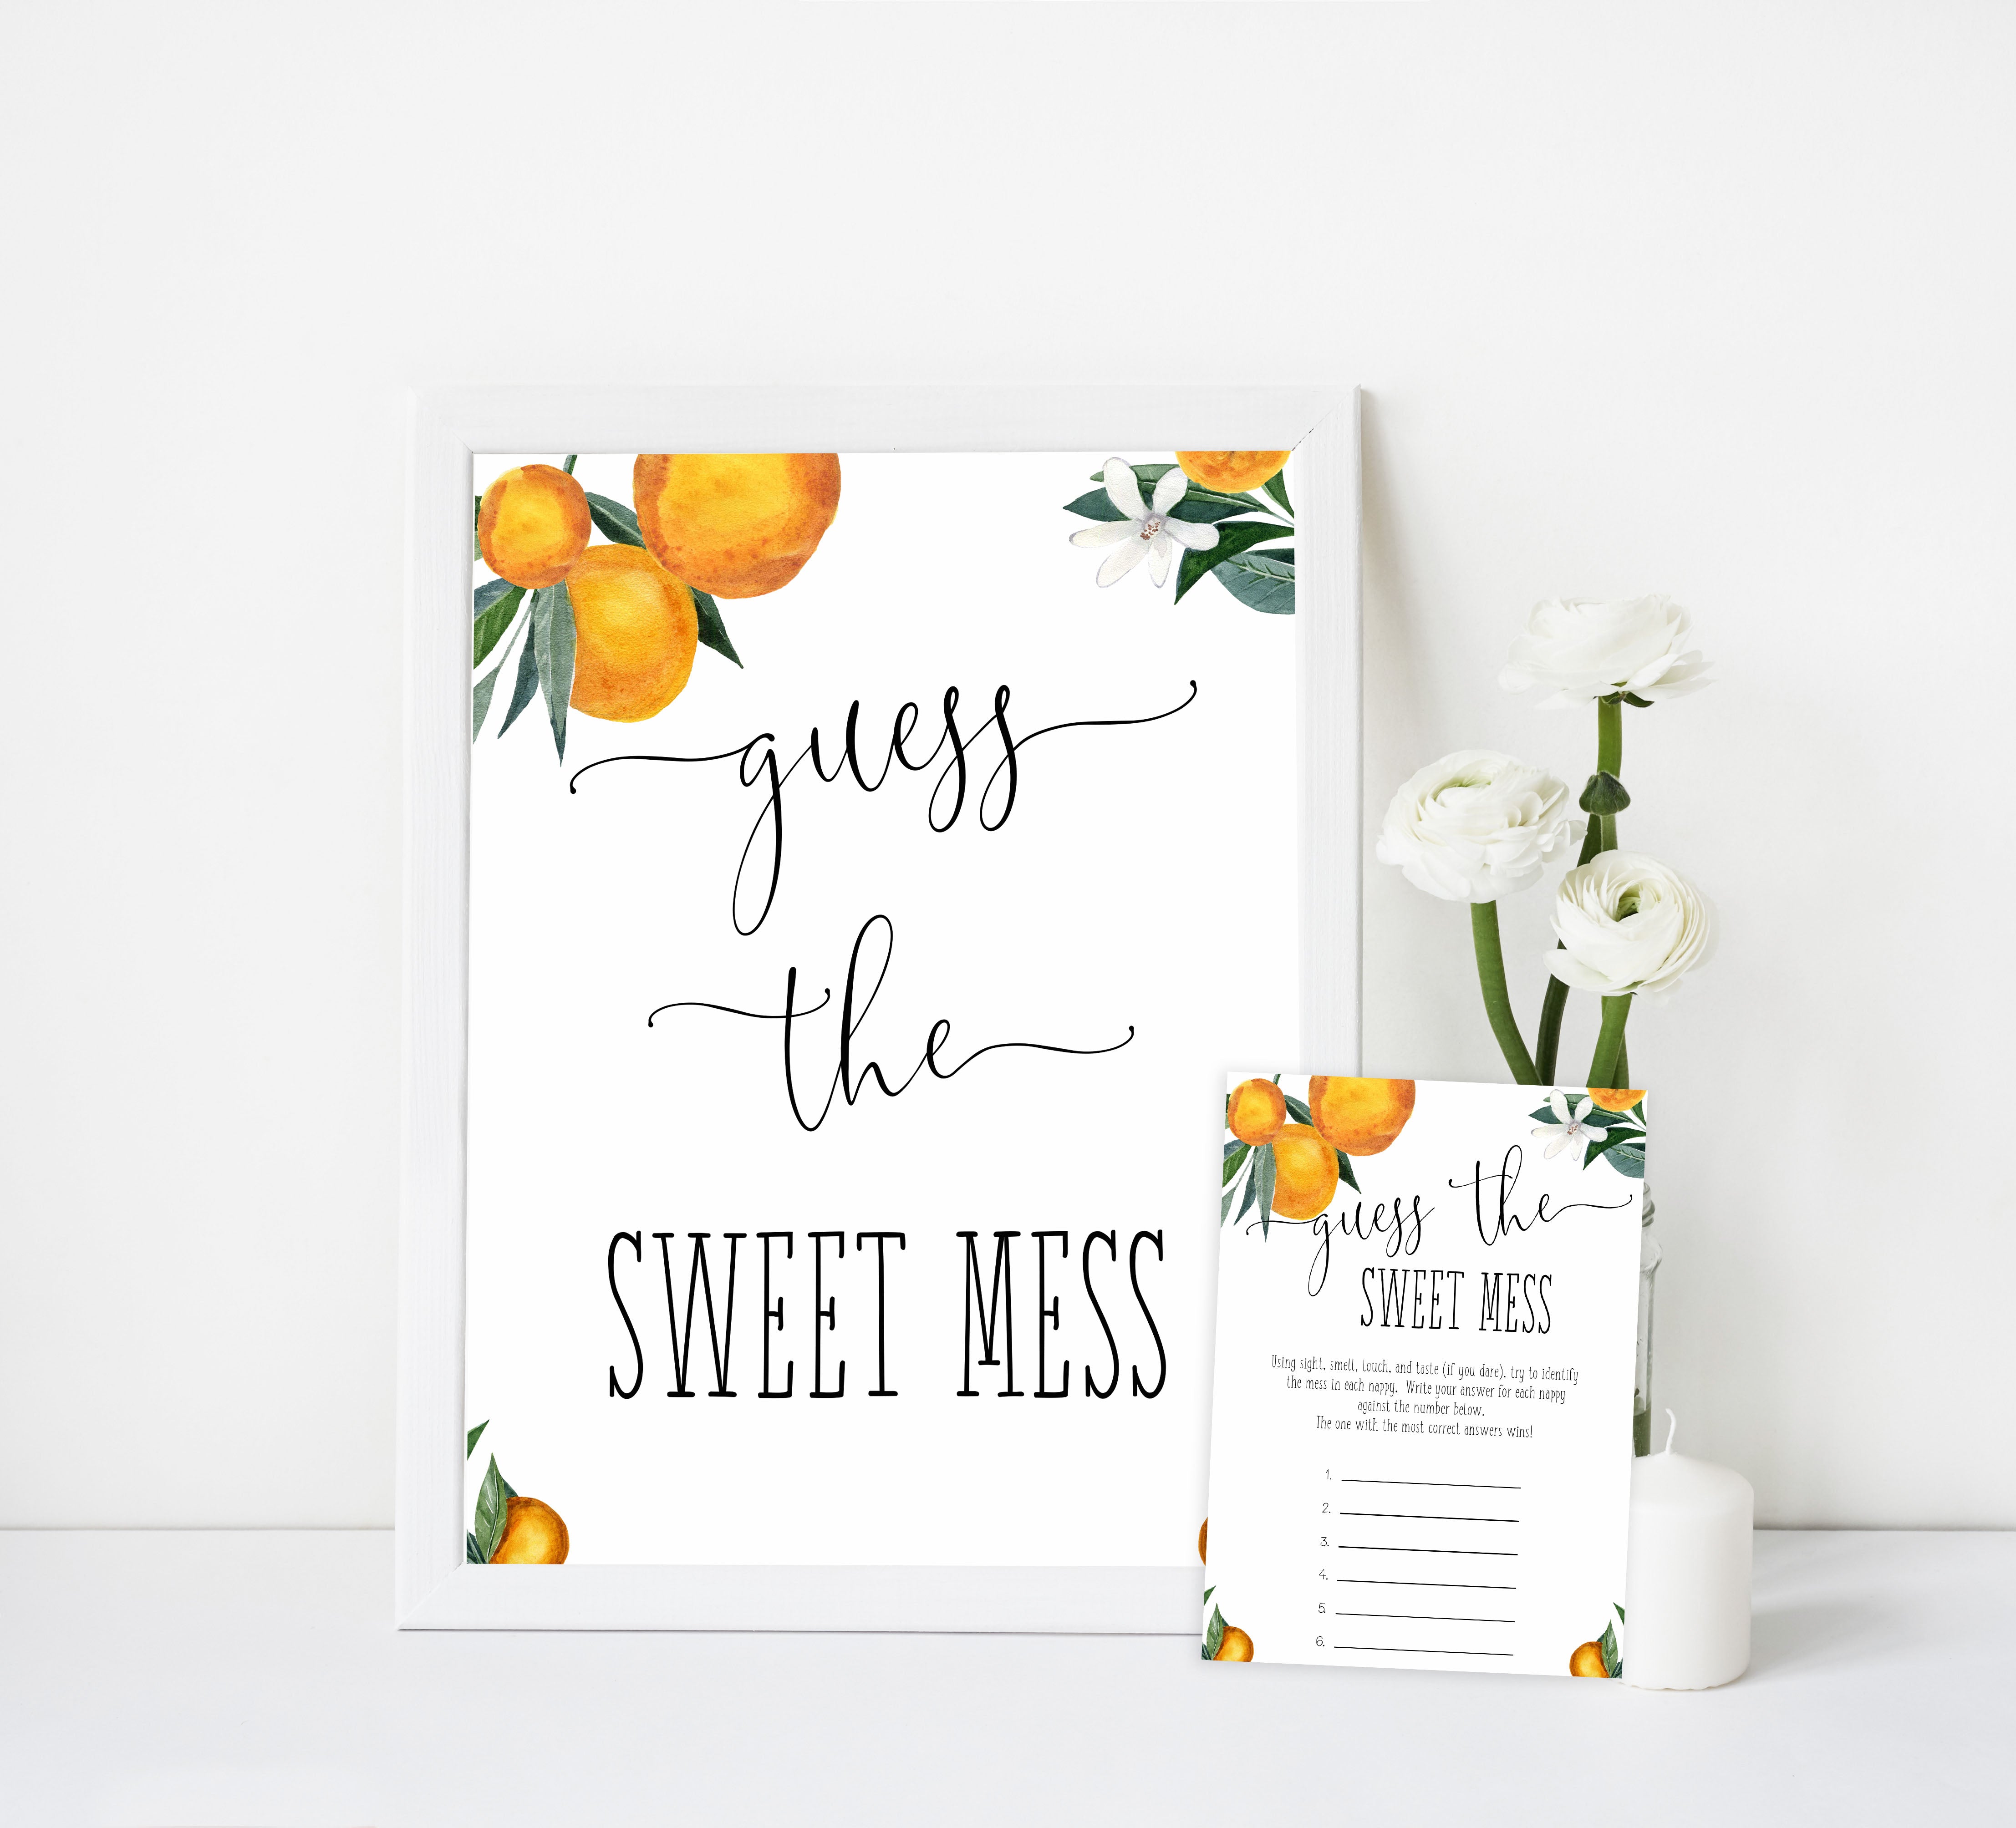 guess the sweet mess baby shower game, Printable baby shower games, little cutie baby games, baby shower games, fun baby shower ideas, top baby shower ideas, little cutie baby shower, baby shower games, fun little cutie baby shower ideas, citrus baby shower games, citrus baby shower, orange baby shower